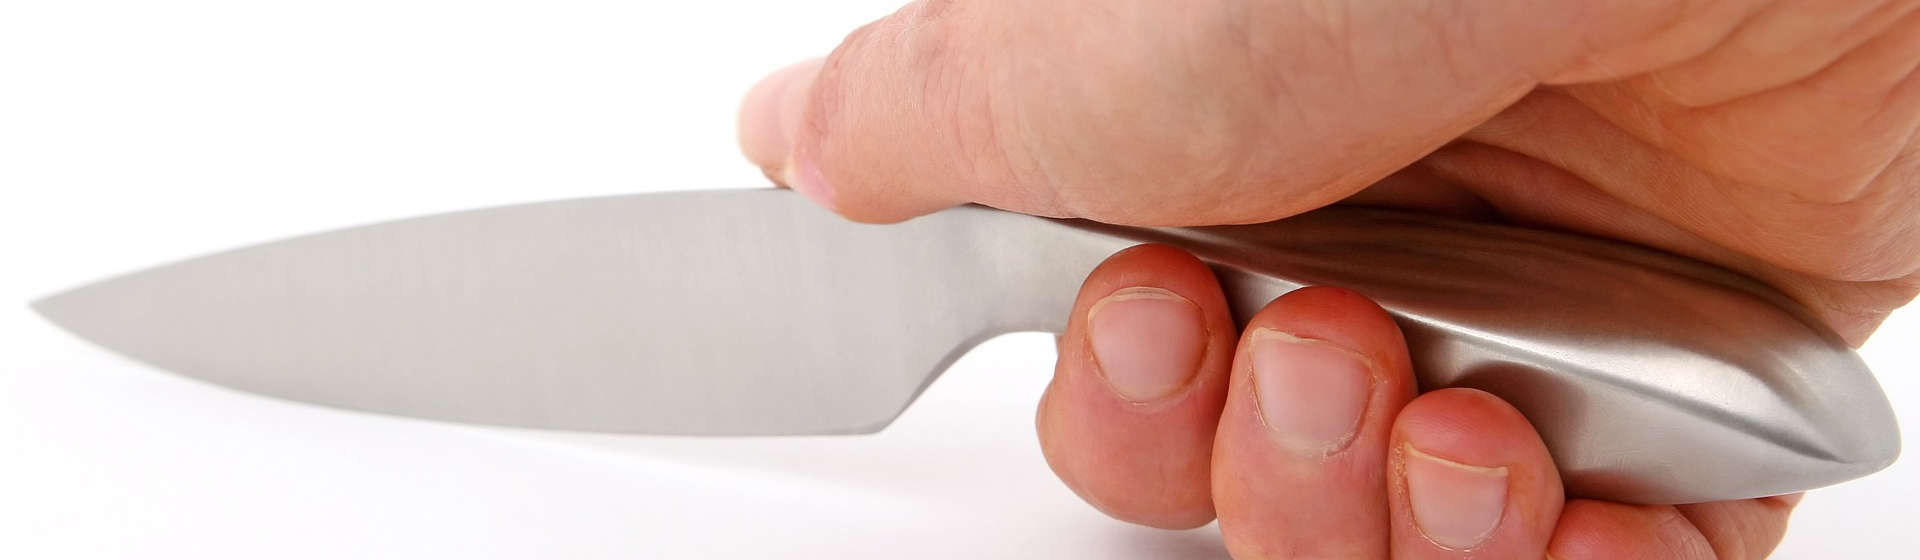 How to Sharpen Ceramic Knives Properly